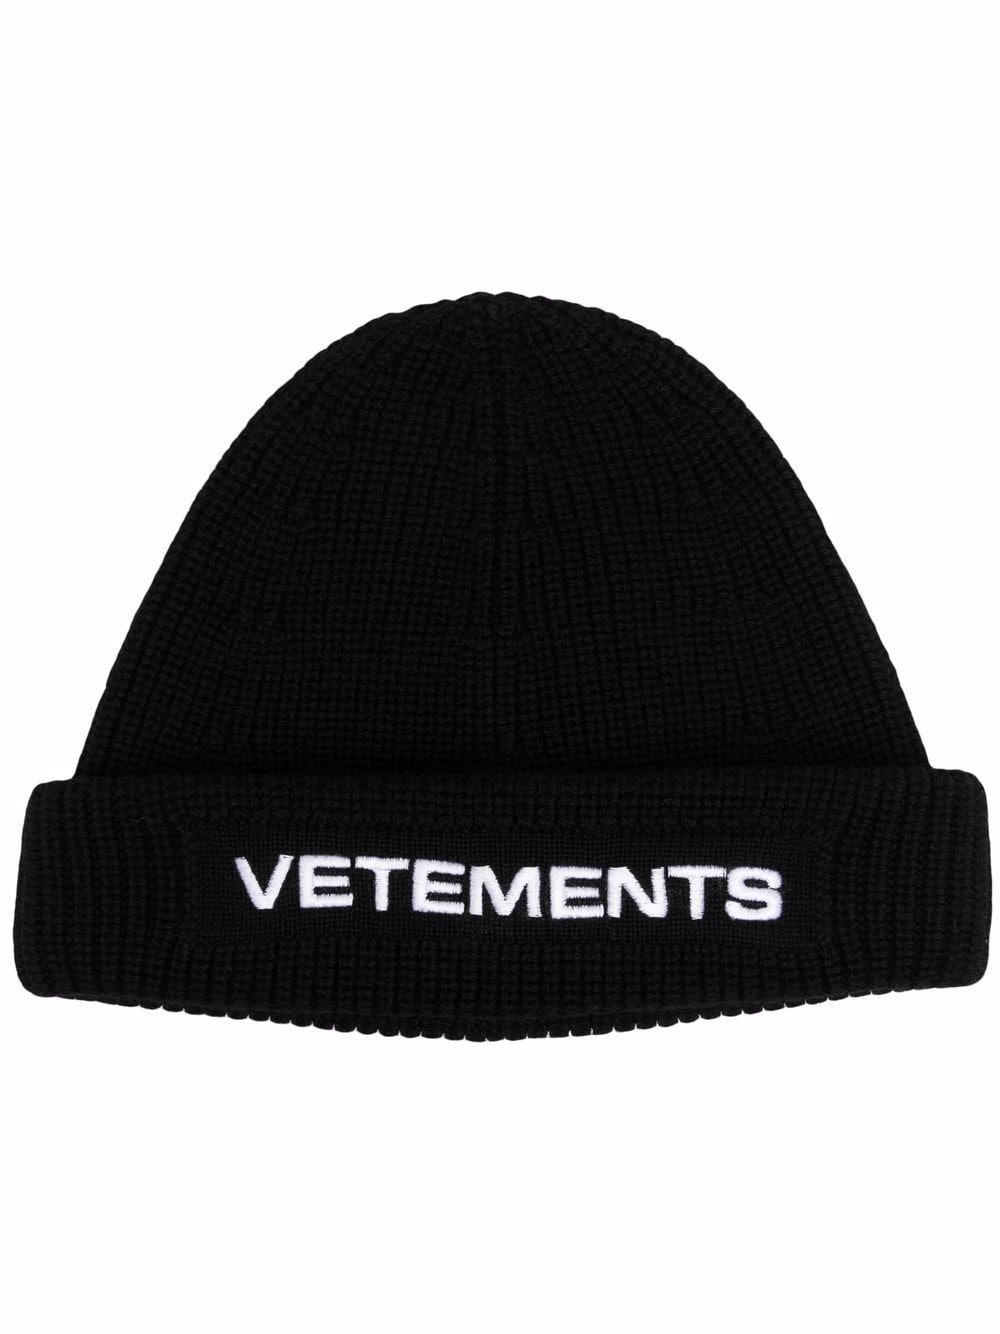 embroidered-logo ribbed beanie